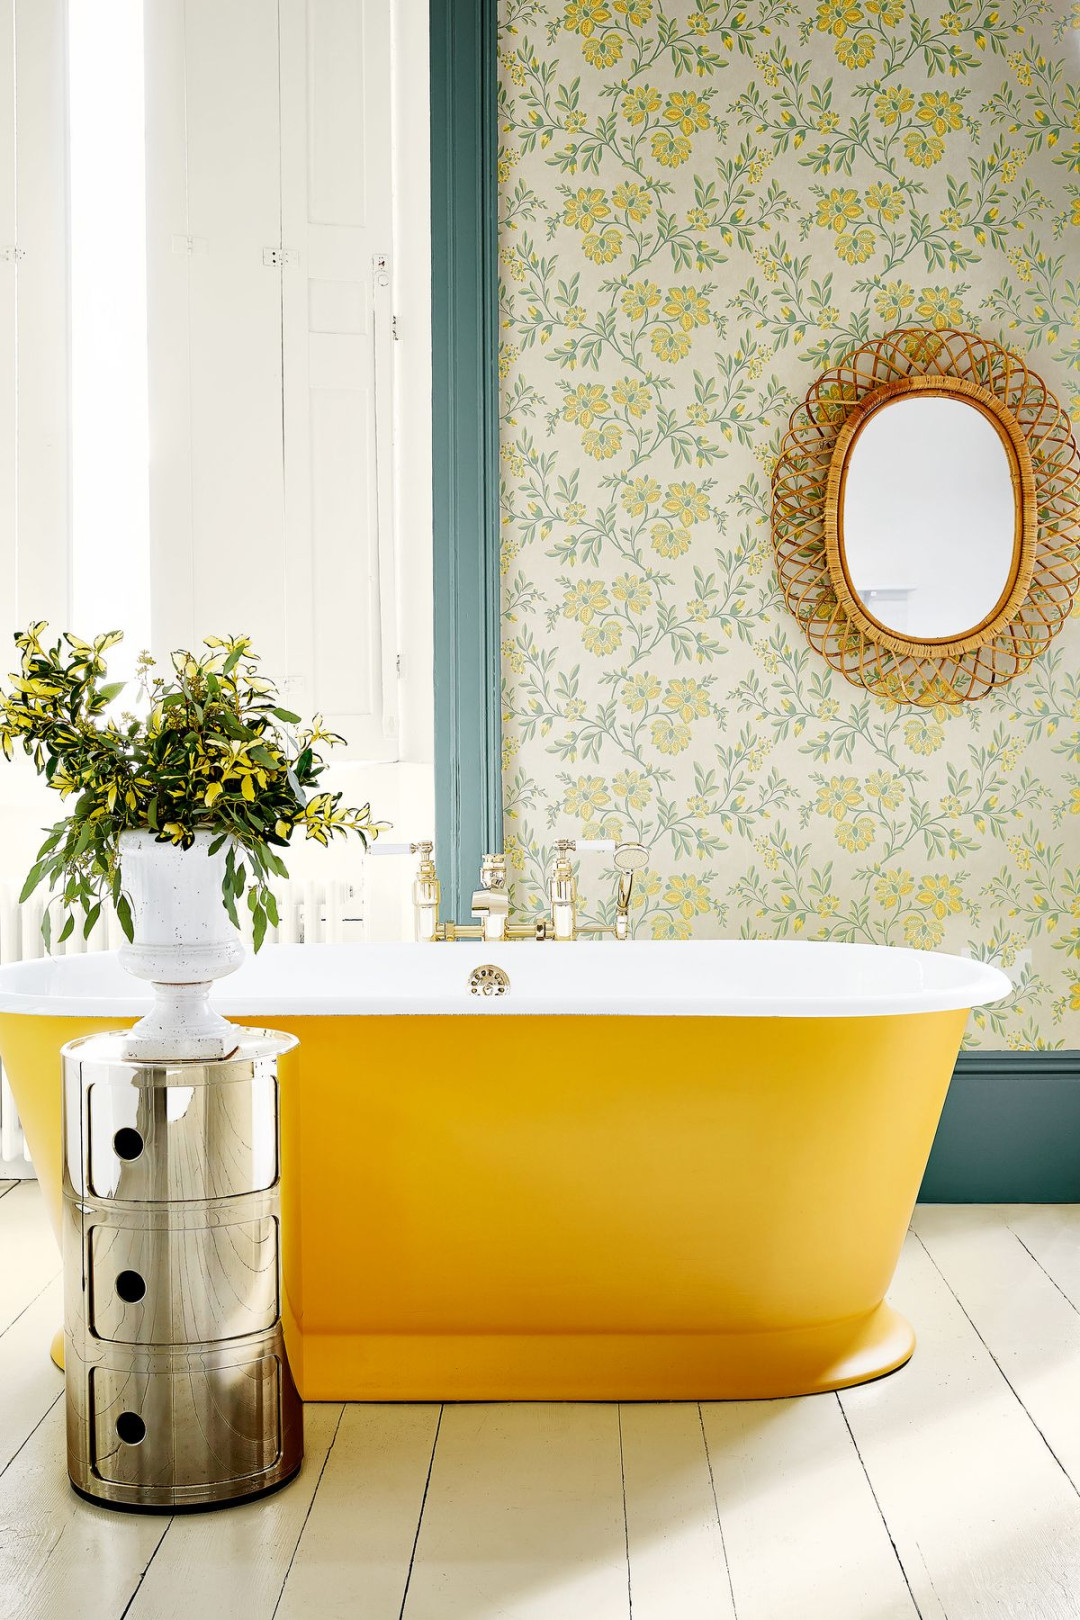 Colourful bathrooms:  ideas that are everything but monochrome